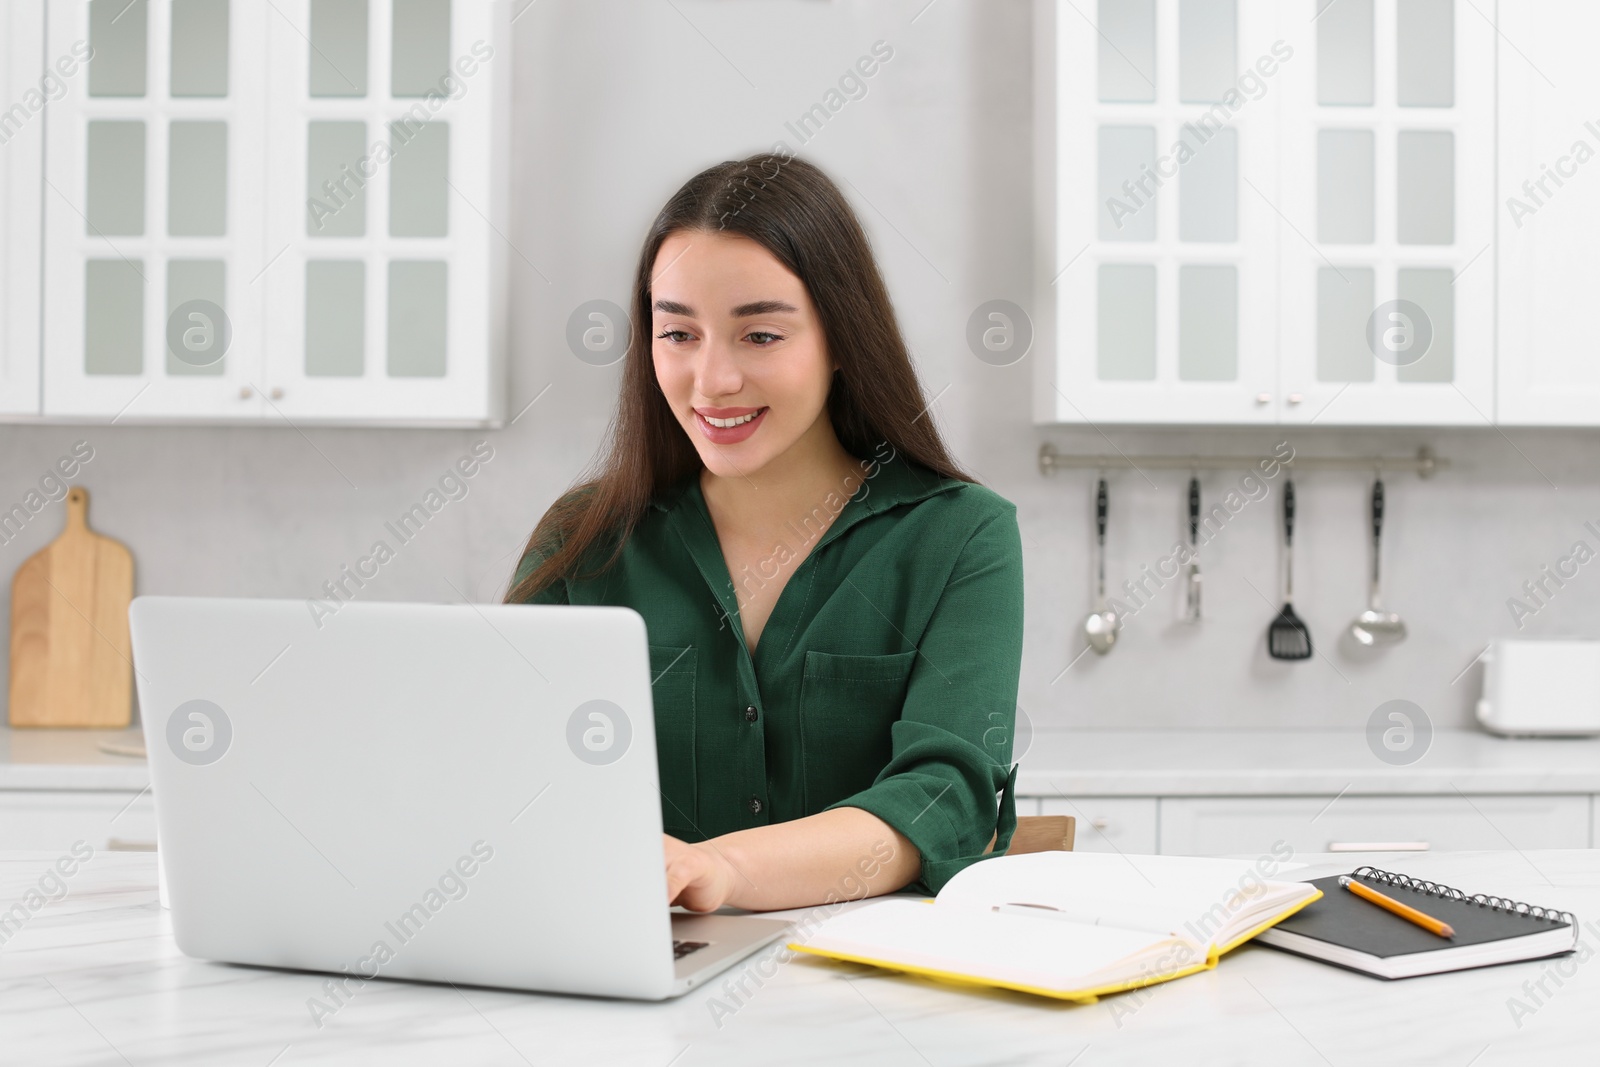 Photo of Home workplace. Happy woman typing on laptop at marble desk in kitchen